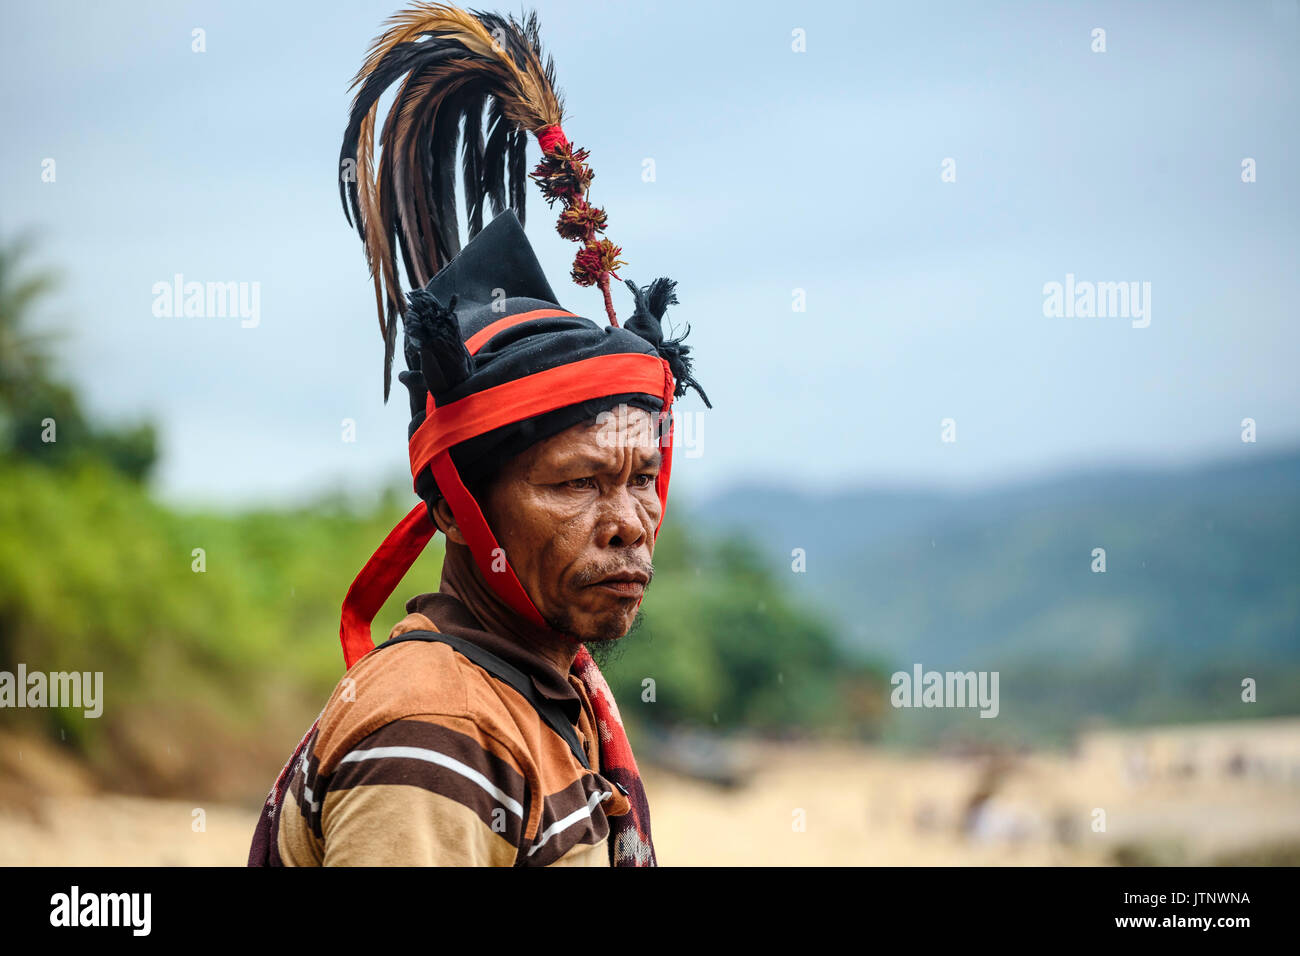 Man wearing hat and traditional costume, Pasola festival, Sumba Island, Indonesia Stock Photo